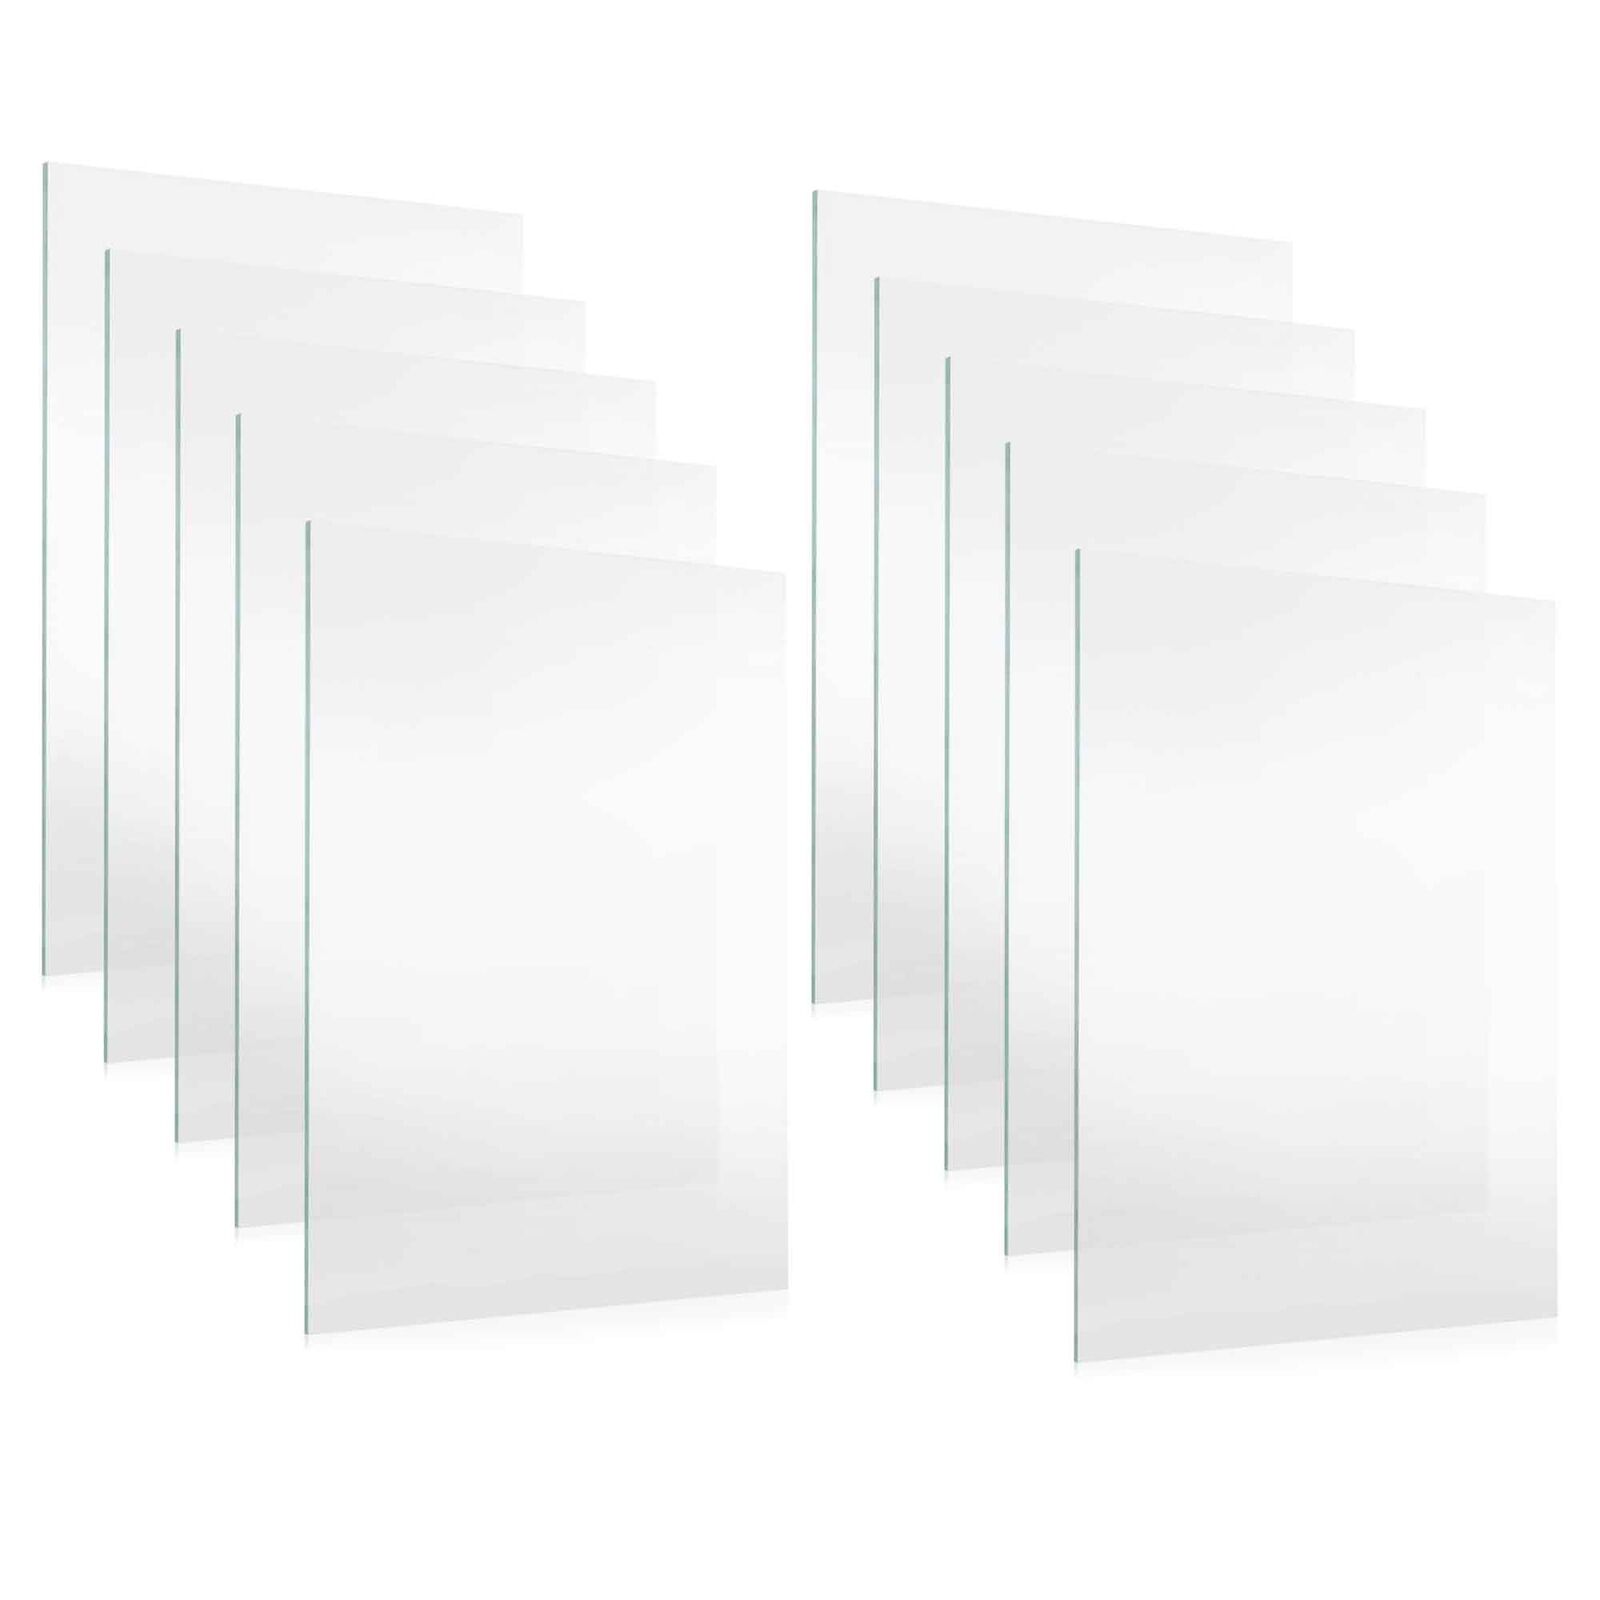 10 Sheets Of UV-Resistant Frame-Grade Acrylic Replacement for 13x19 Picture